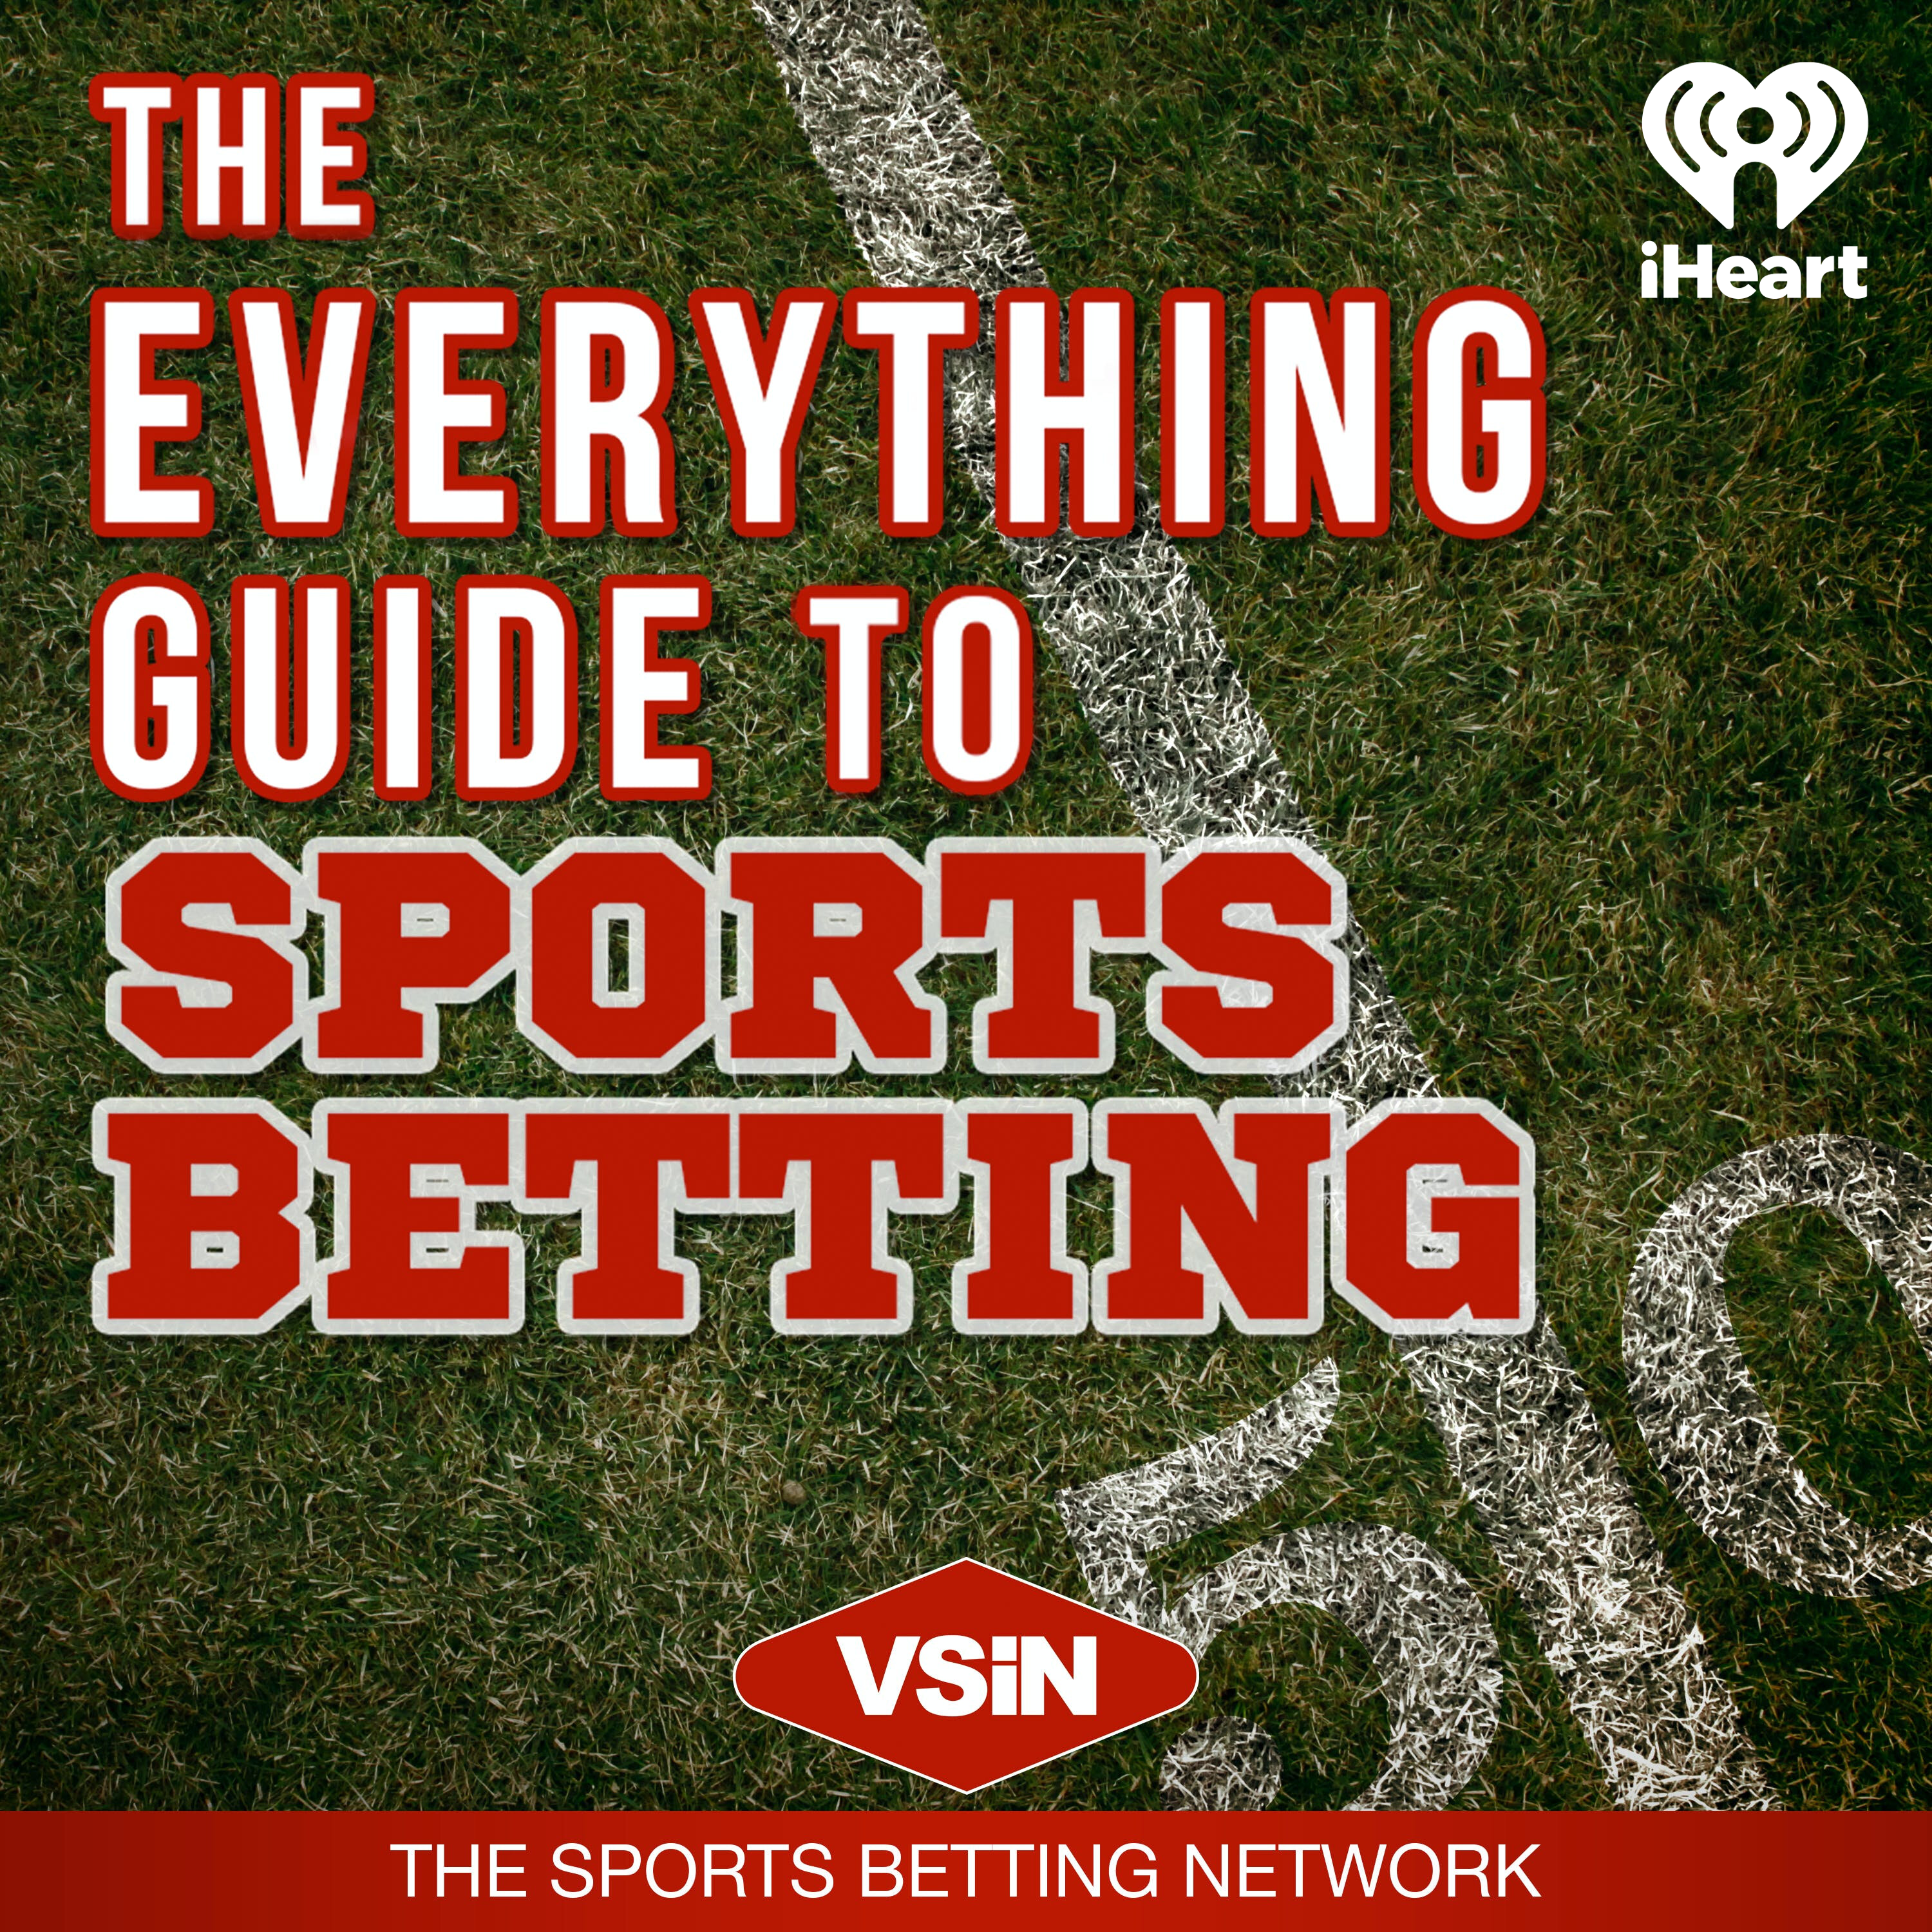 Everything Guide to Sports Betting | January 20, 2021